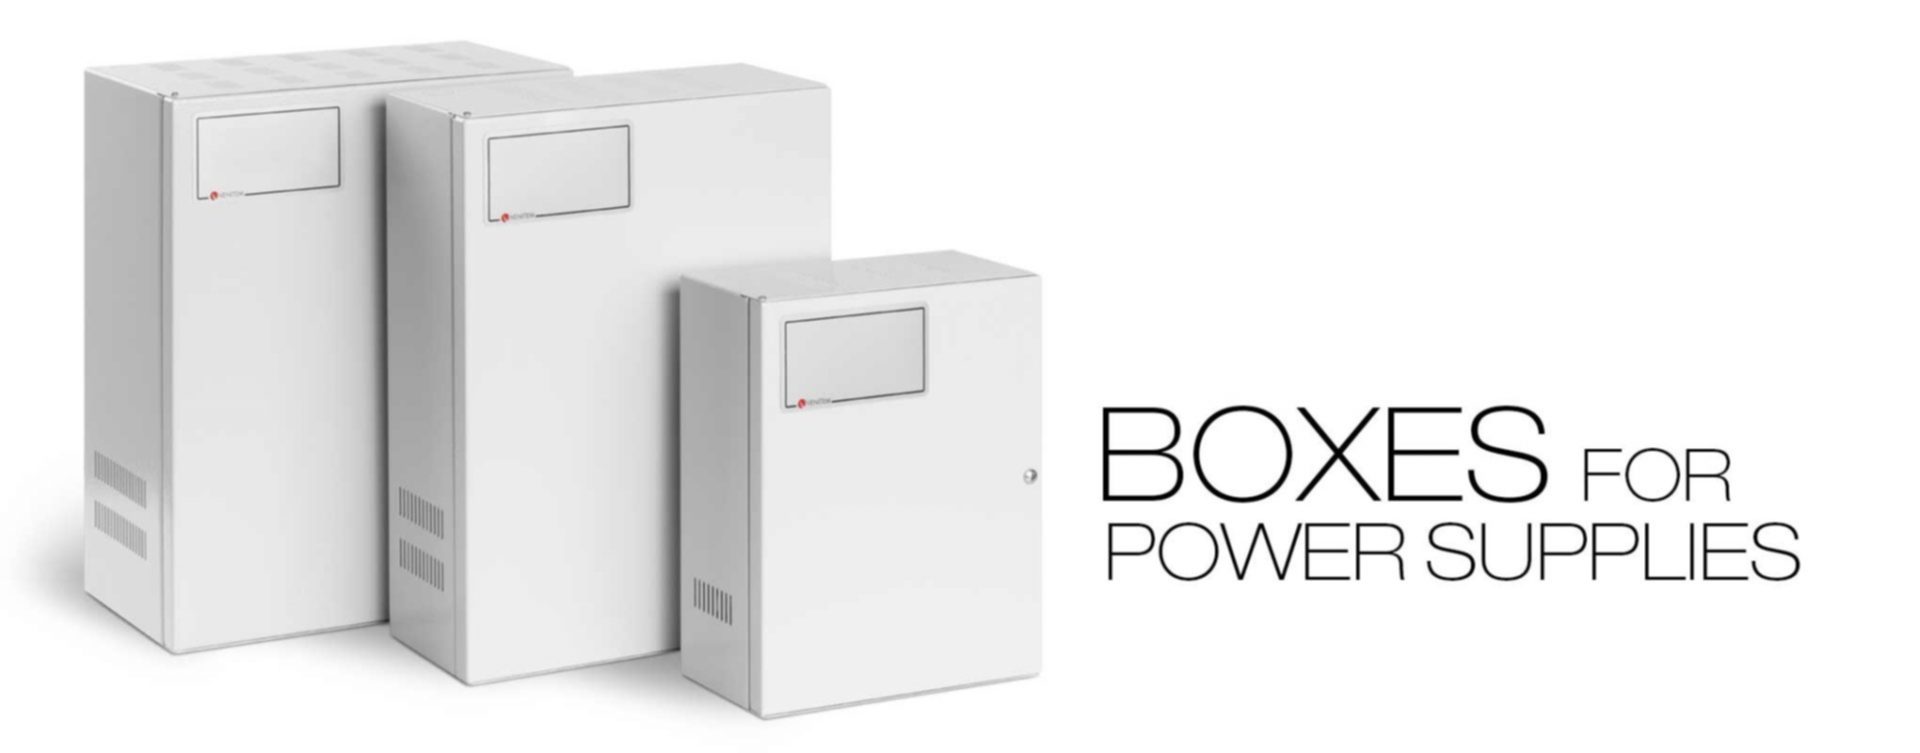 Boxes for power supplies